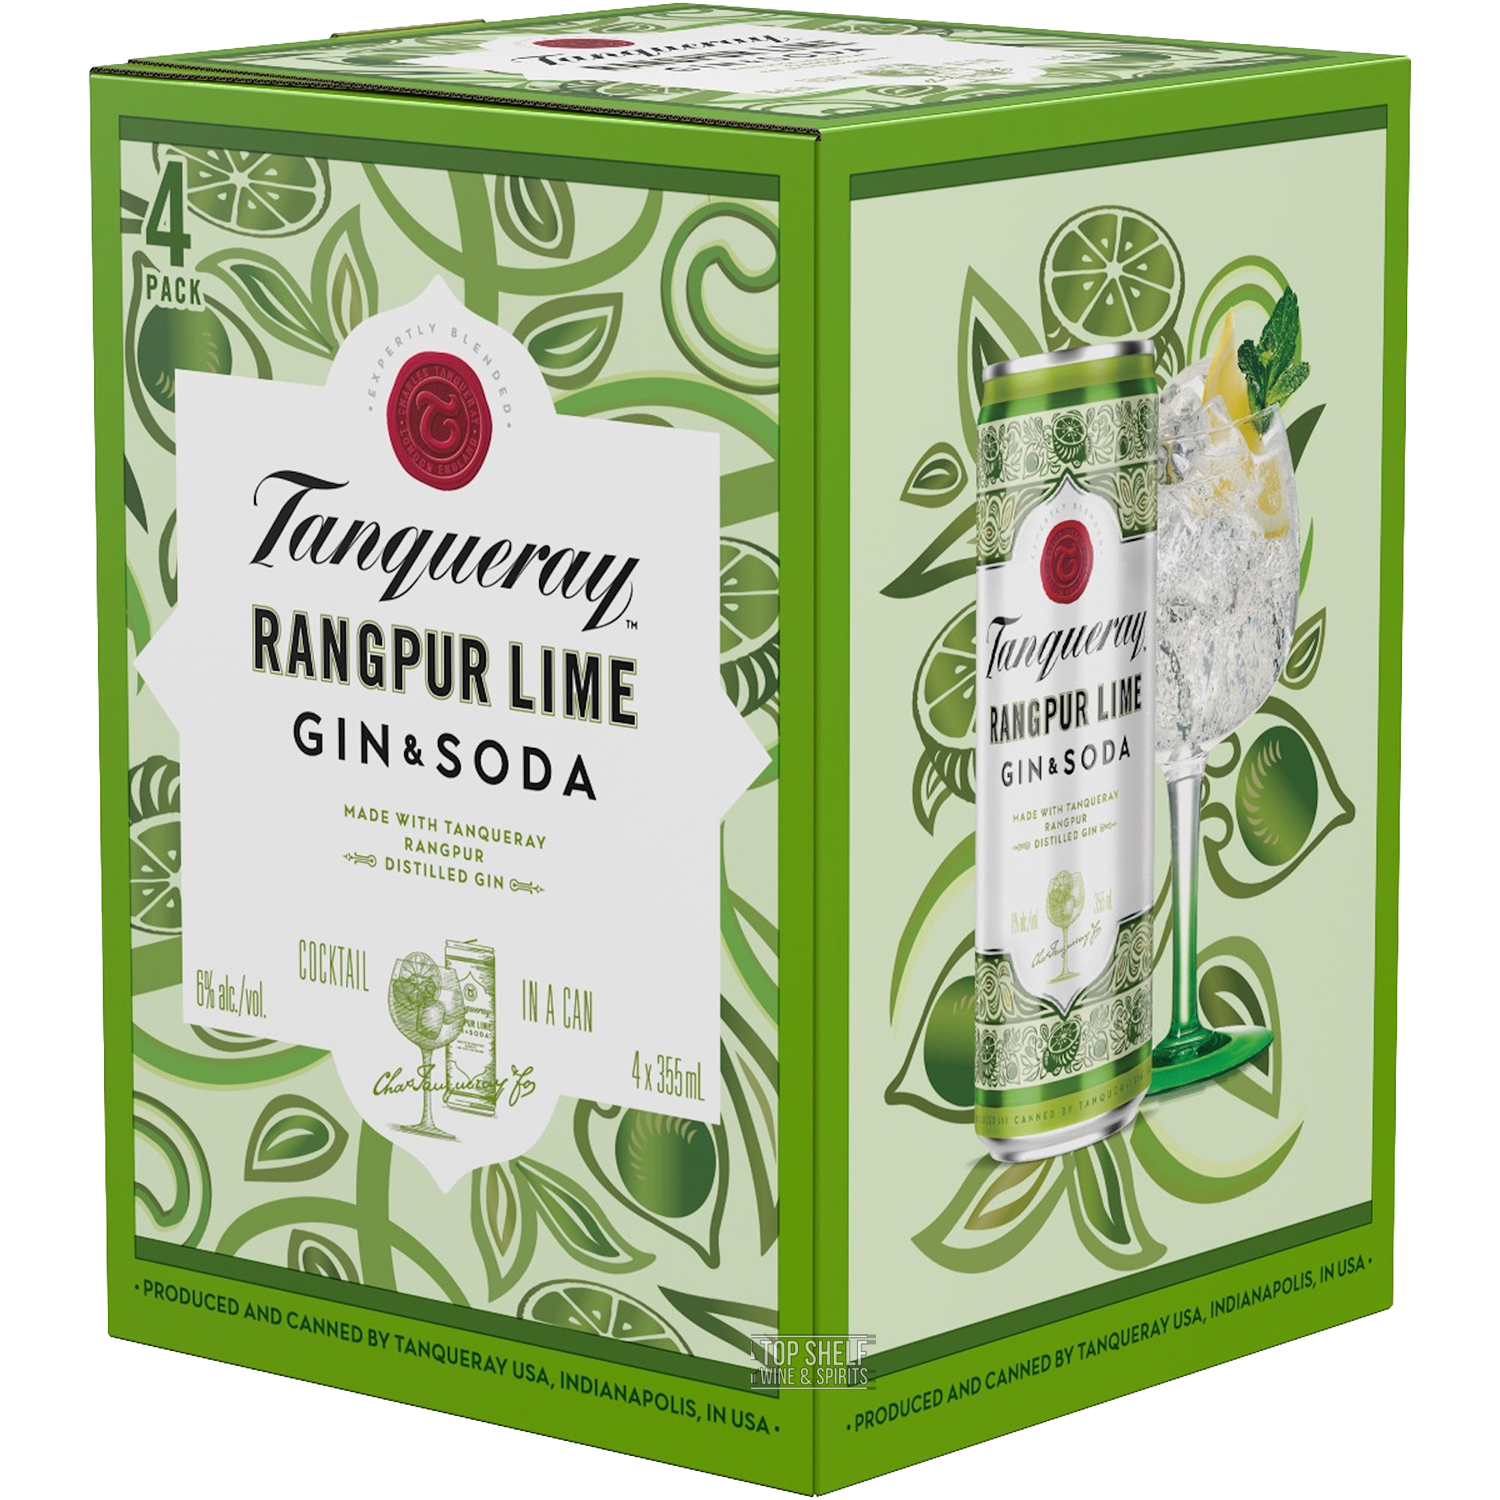 Tanqueray Rangpur Lime Gin & Soda 4 pack Cans